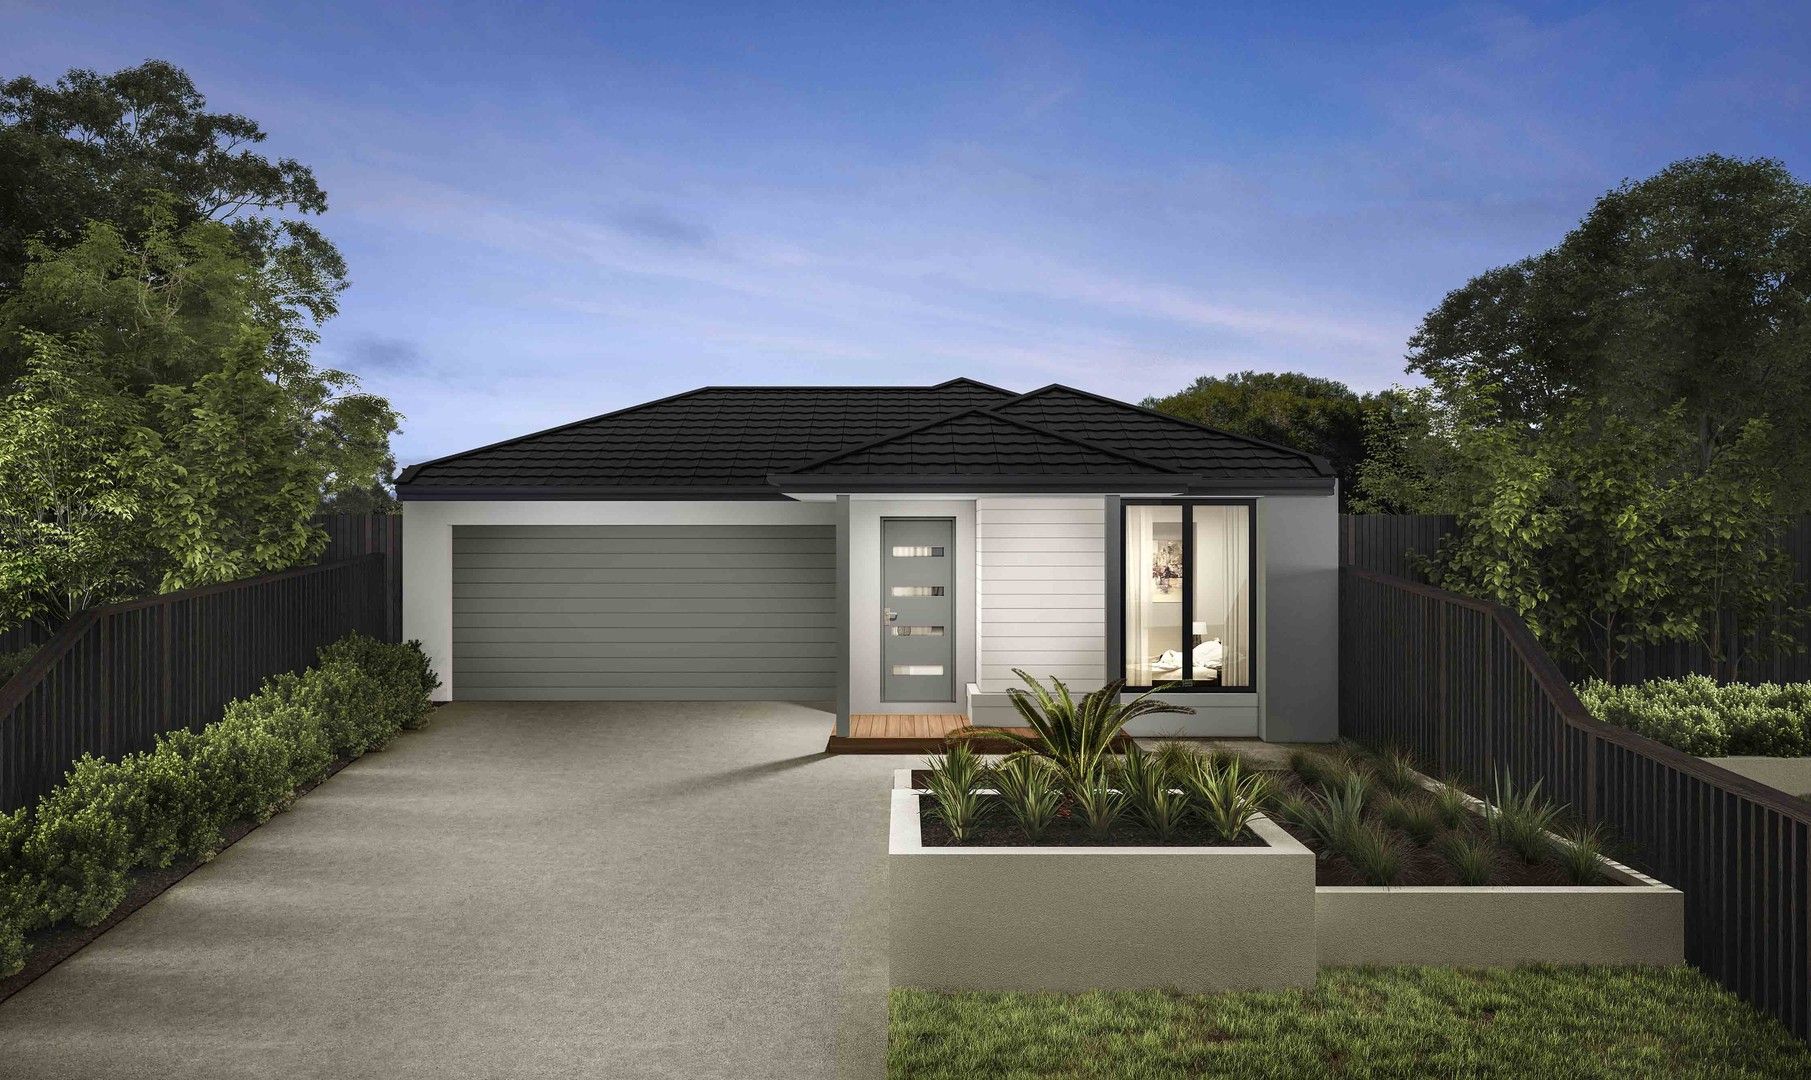 4 bedrooms New House & Land in Lucania Crescent, Lot: 314 TARNEIT VIC, 3029